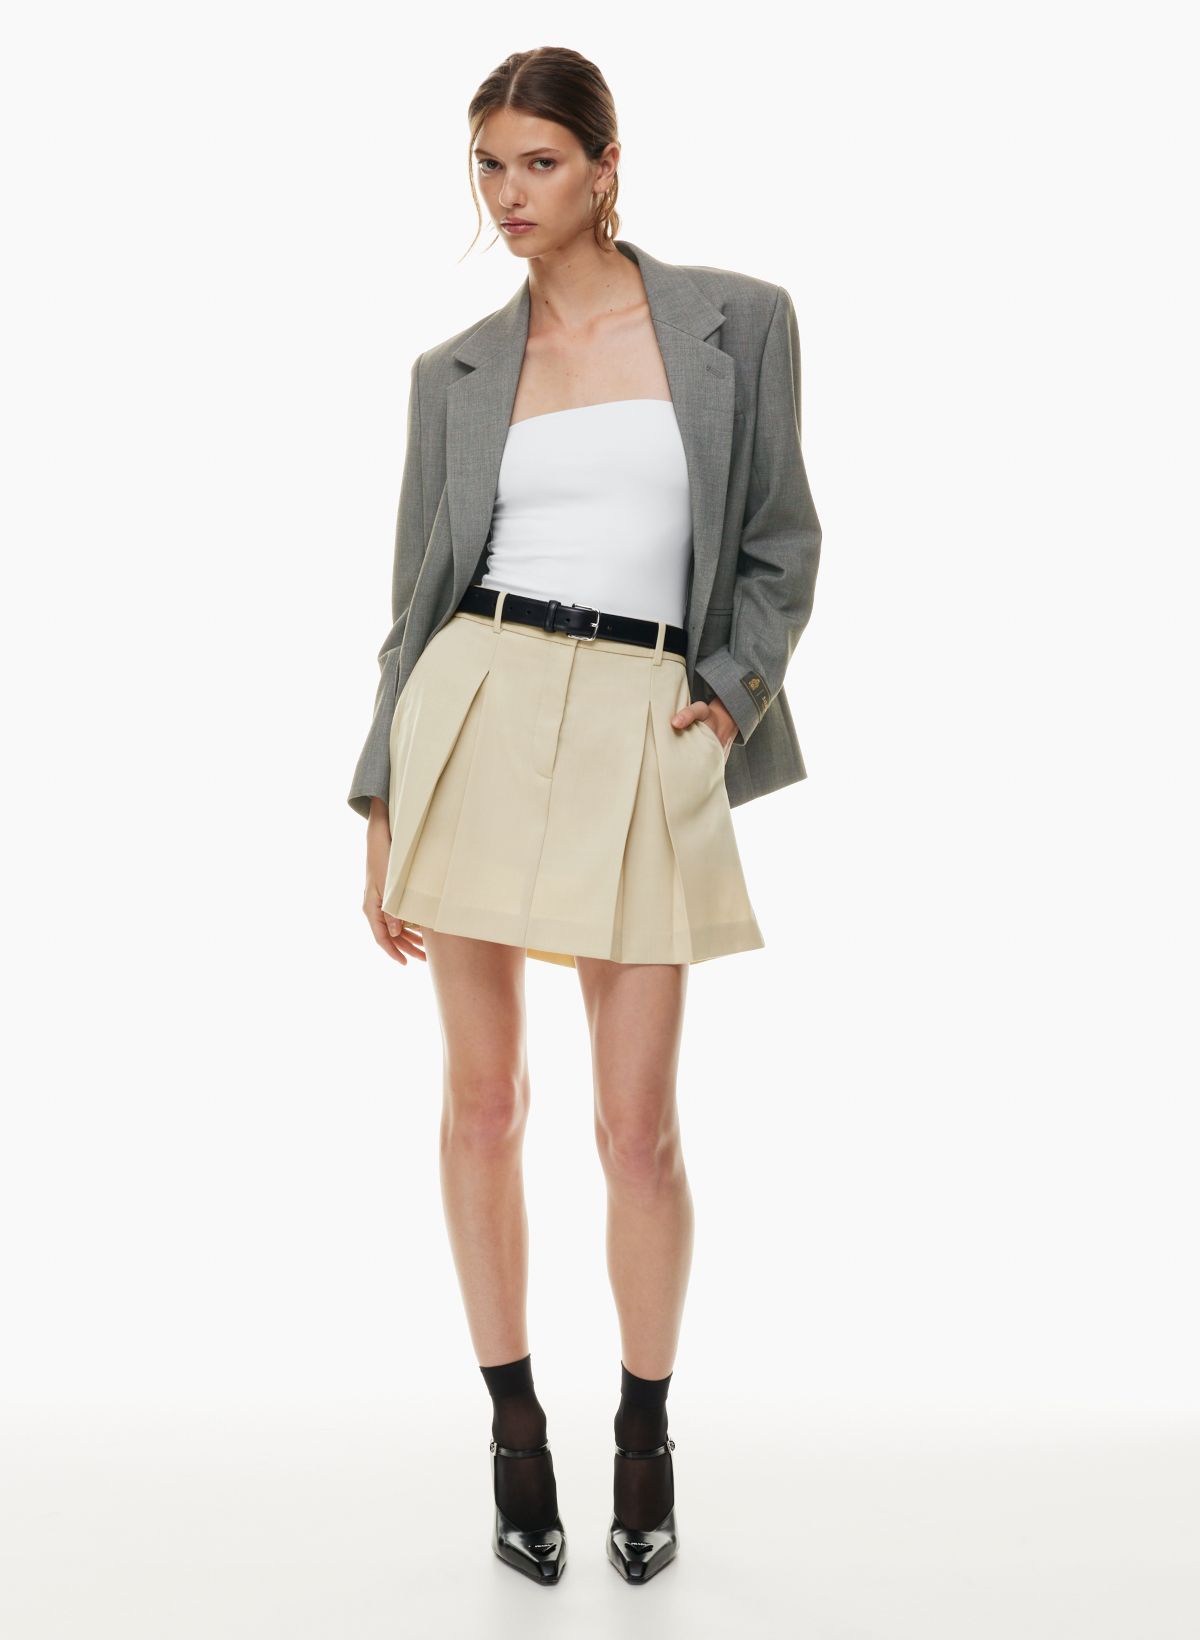 White Top & Brown Leather Shorts Outfit - The Style Contour